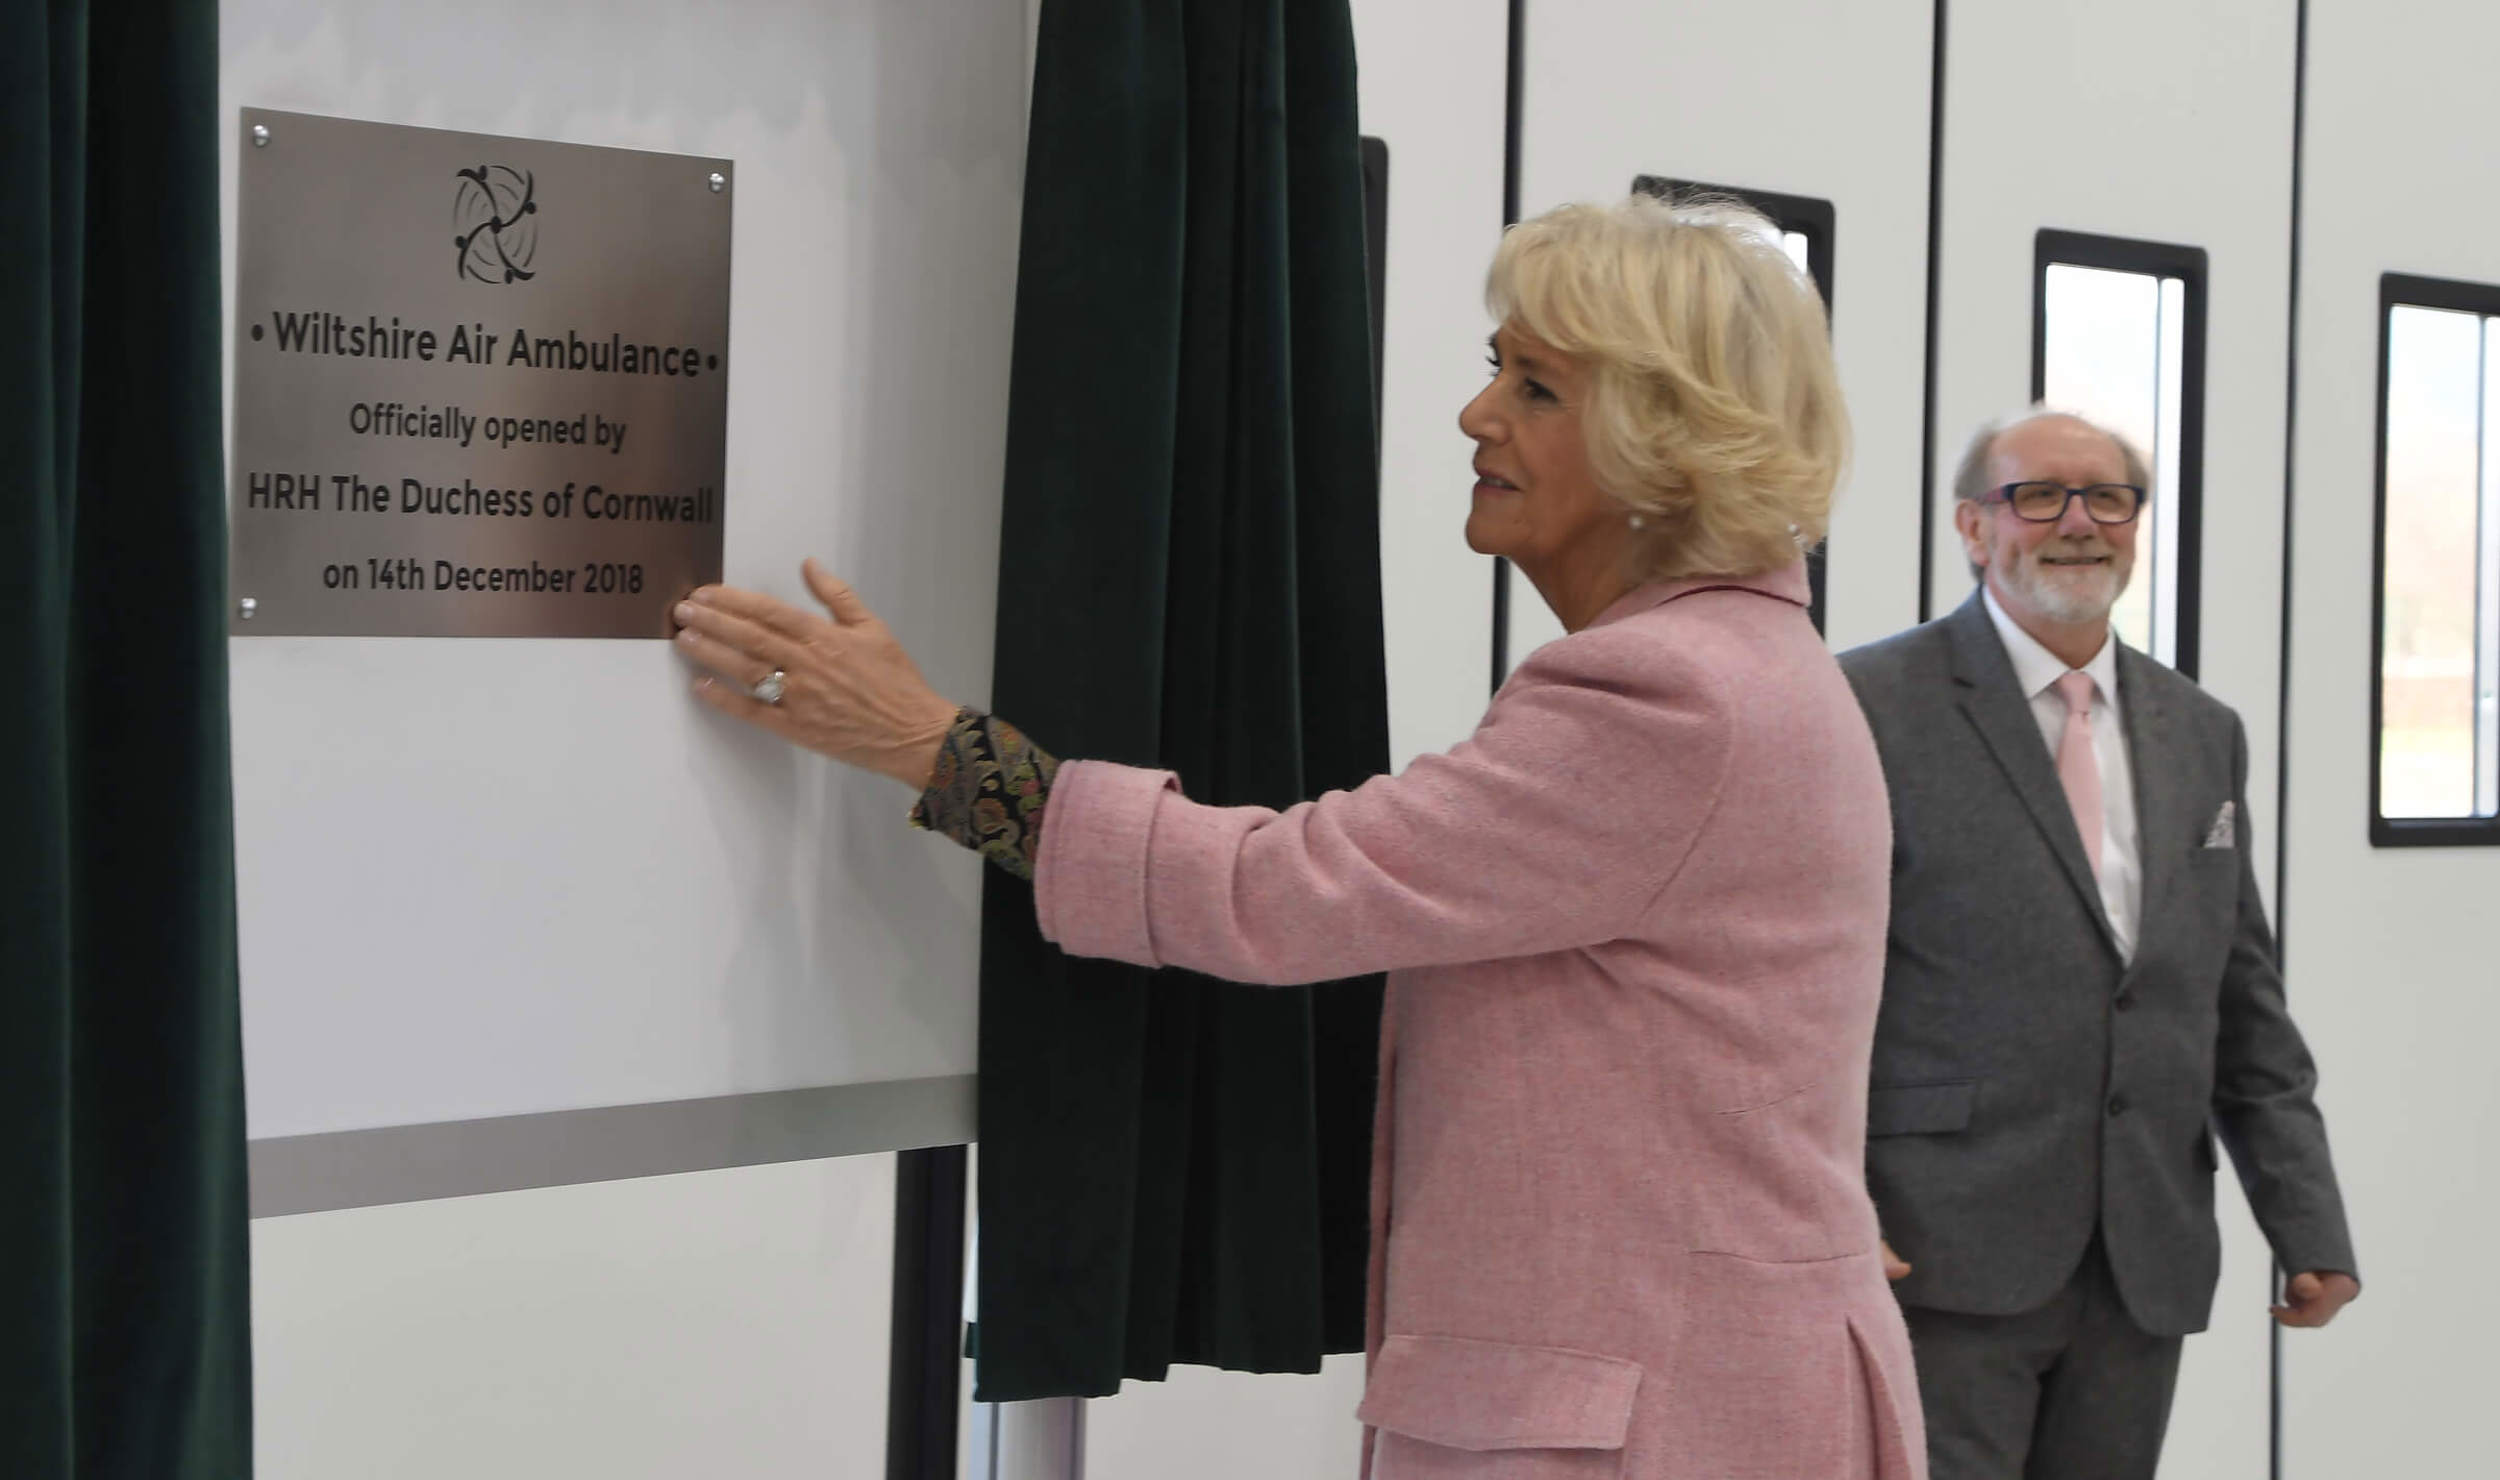 The Queen Consort unveiling the opening plaque for Wiltshire Air Ambulance's new airbase.